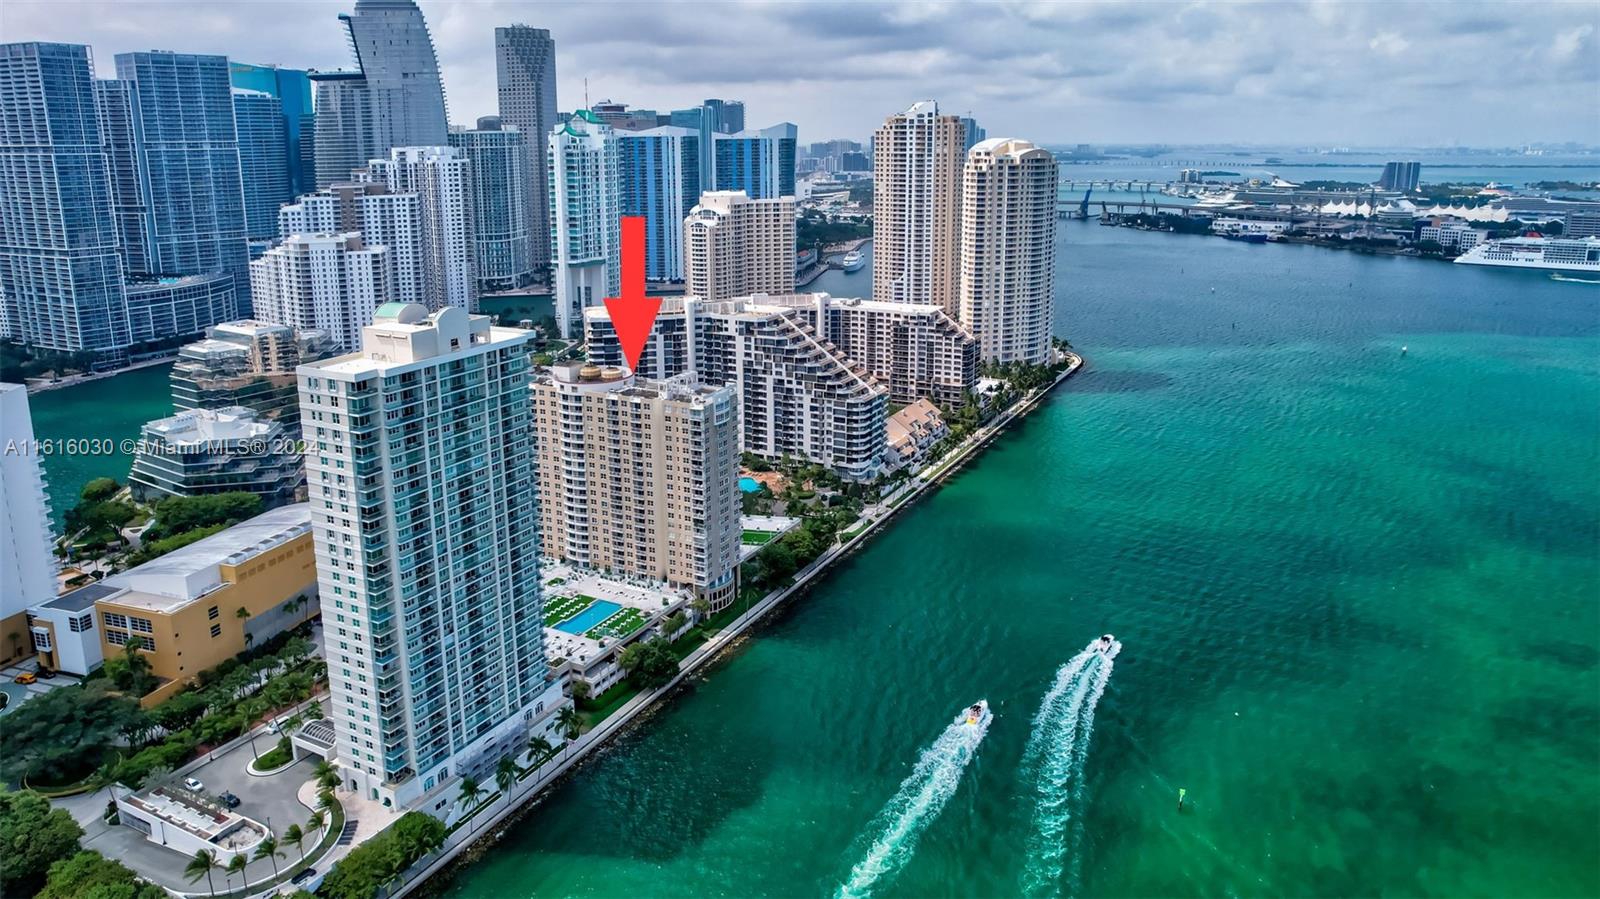 Experience luxury living in this newly renovated 6th floor 2 bed, 2 bath condo at Isola Condominium on the exclusive Brickell Key. Enjoy stunning views of Biscayne Bay, Key Biscayne, Brickell, and the newly renovated pool deck. The community features concierge service, valet parking, a swimming pool, gym, Jacuzzi, and party room. Brickell Key offers serene, scenic living with amenities like a marketplace, restaurant, dry cleaners, beauty salon, and flower shop. Nearby Mandarin Oriental Hotel adds exclusive dining and spa options plus countless other popular restaurants and shopping nearby. Live in tranquility and convenience!